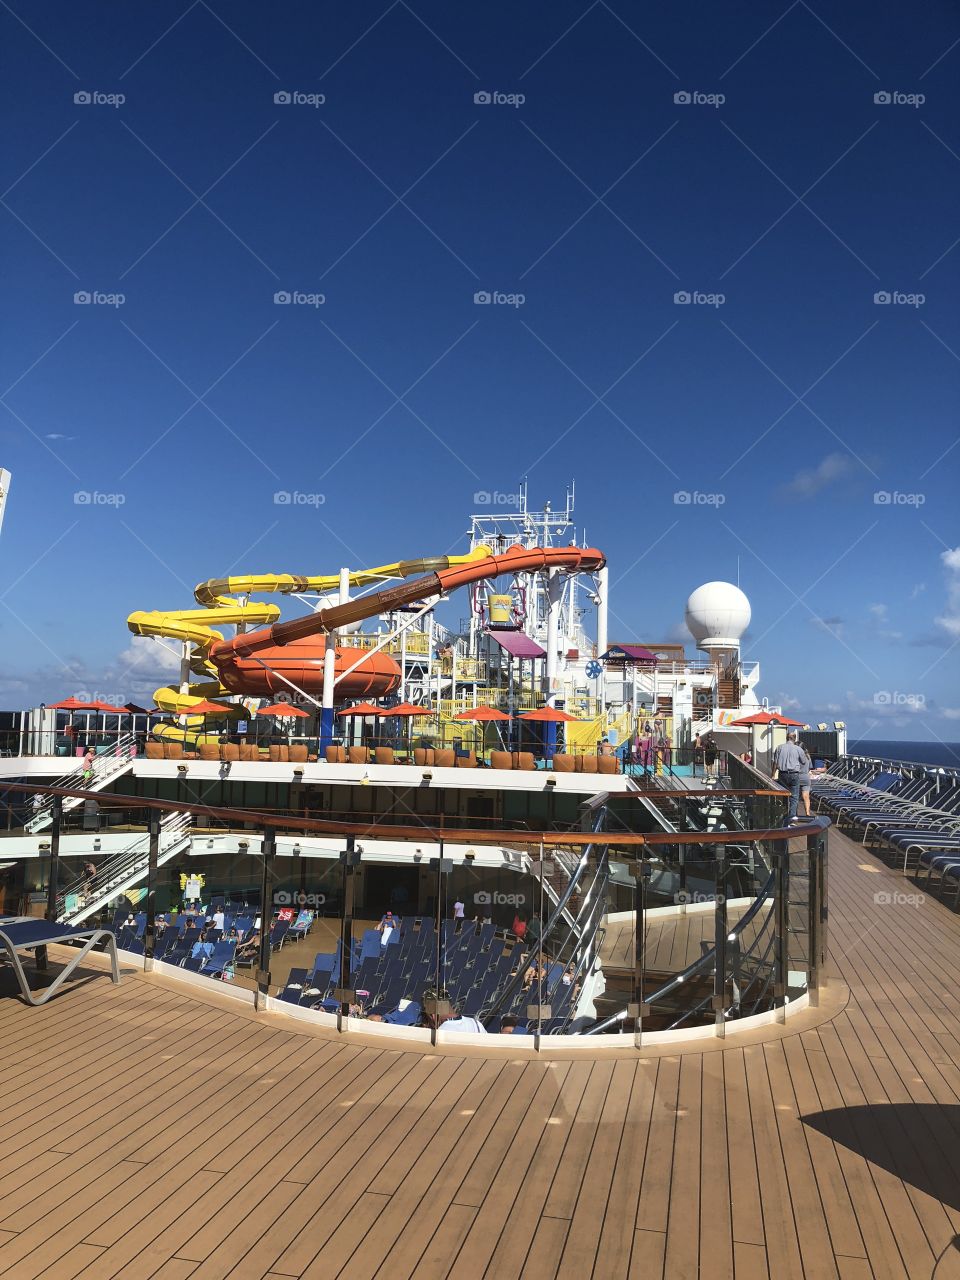 Nice water slide on the Cruise 